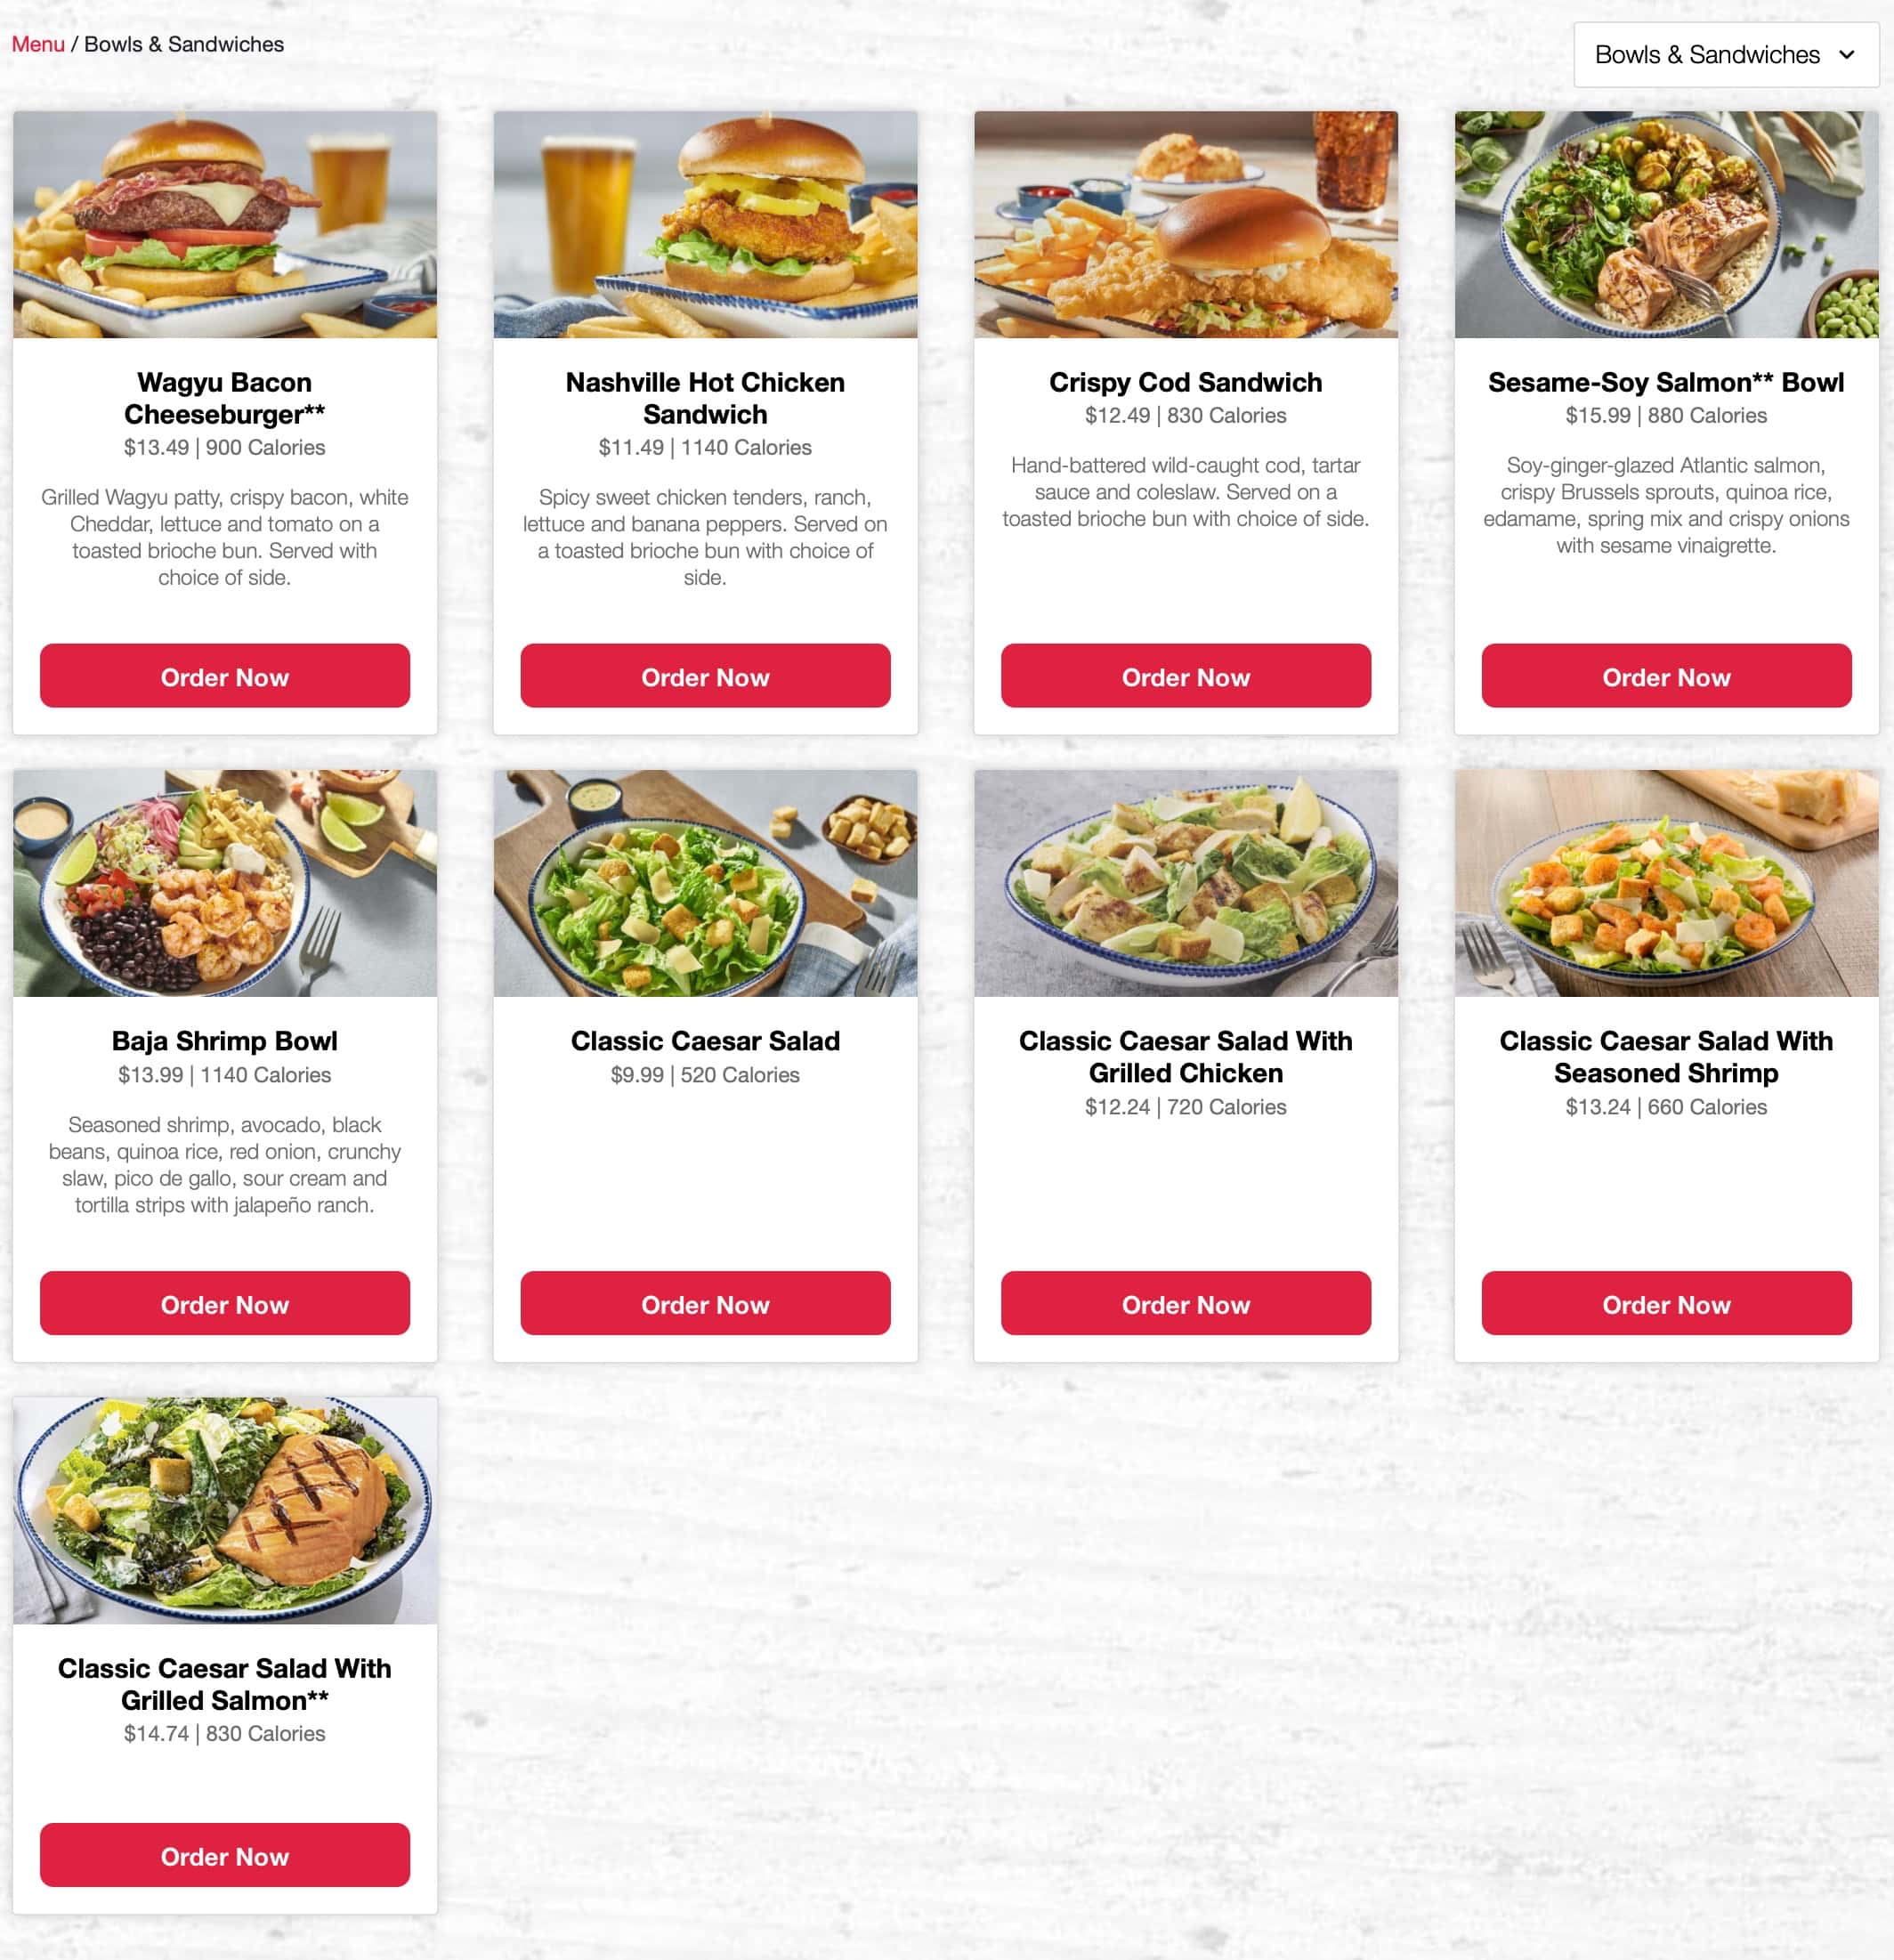 Red Lobster Bowls and Sandwiches Menu